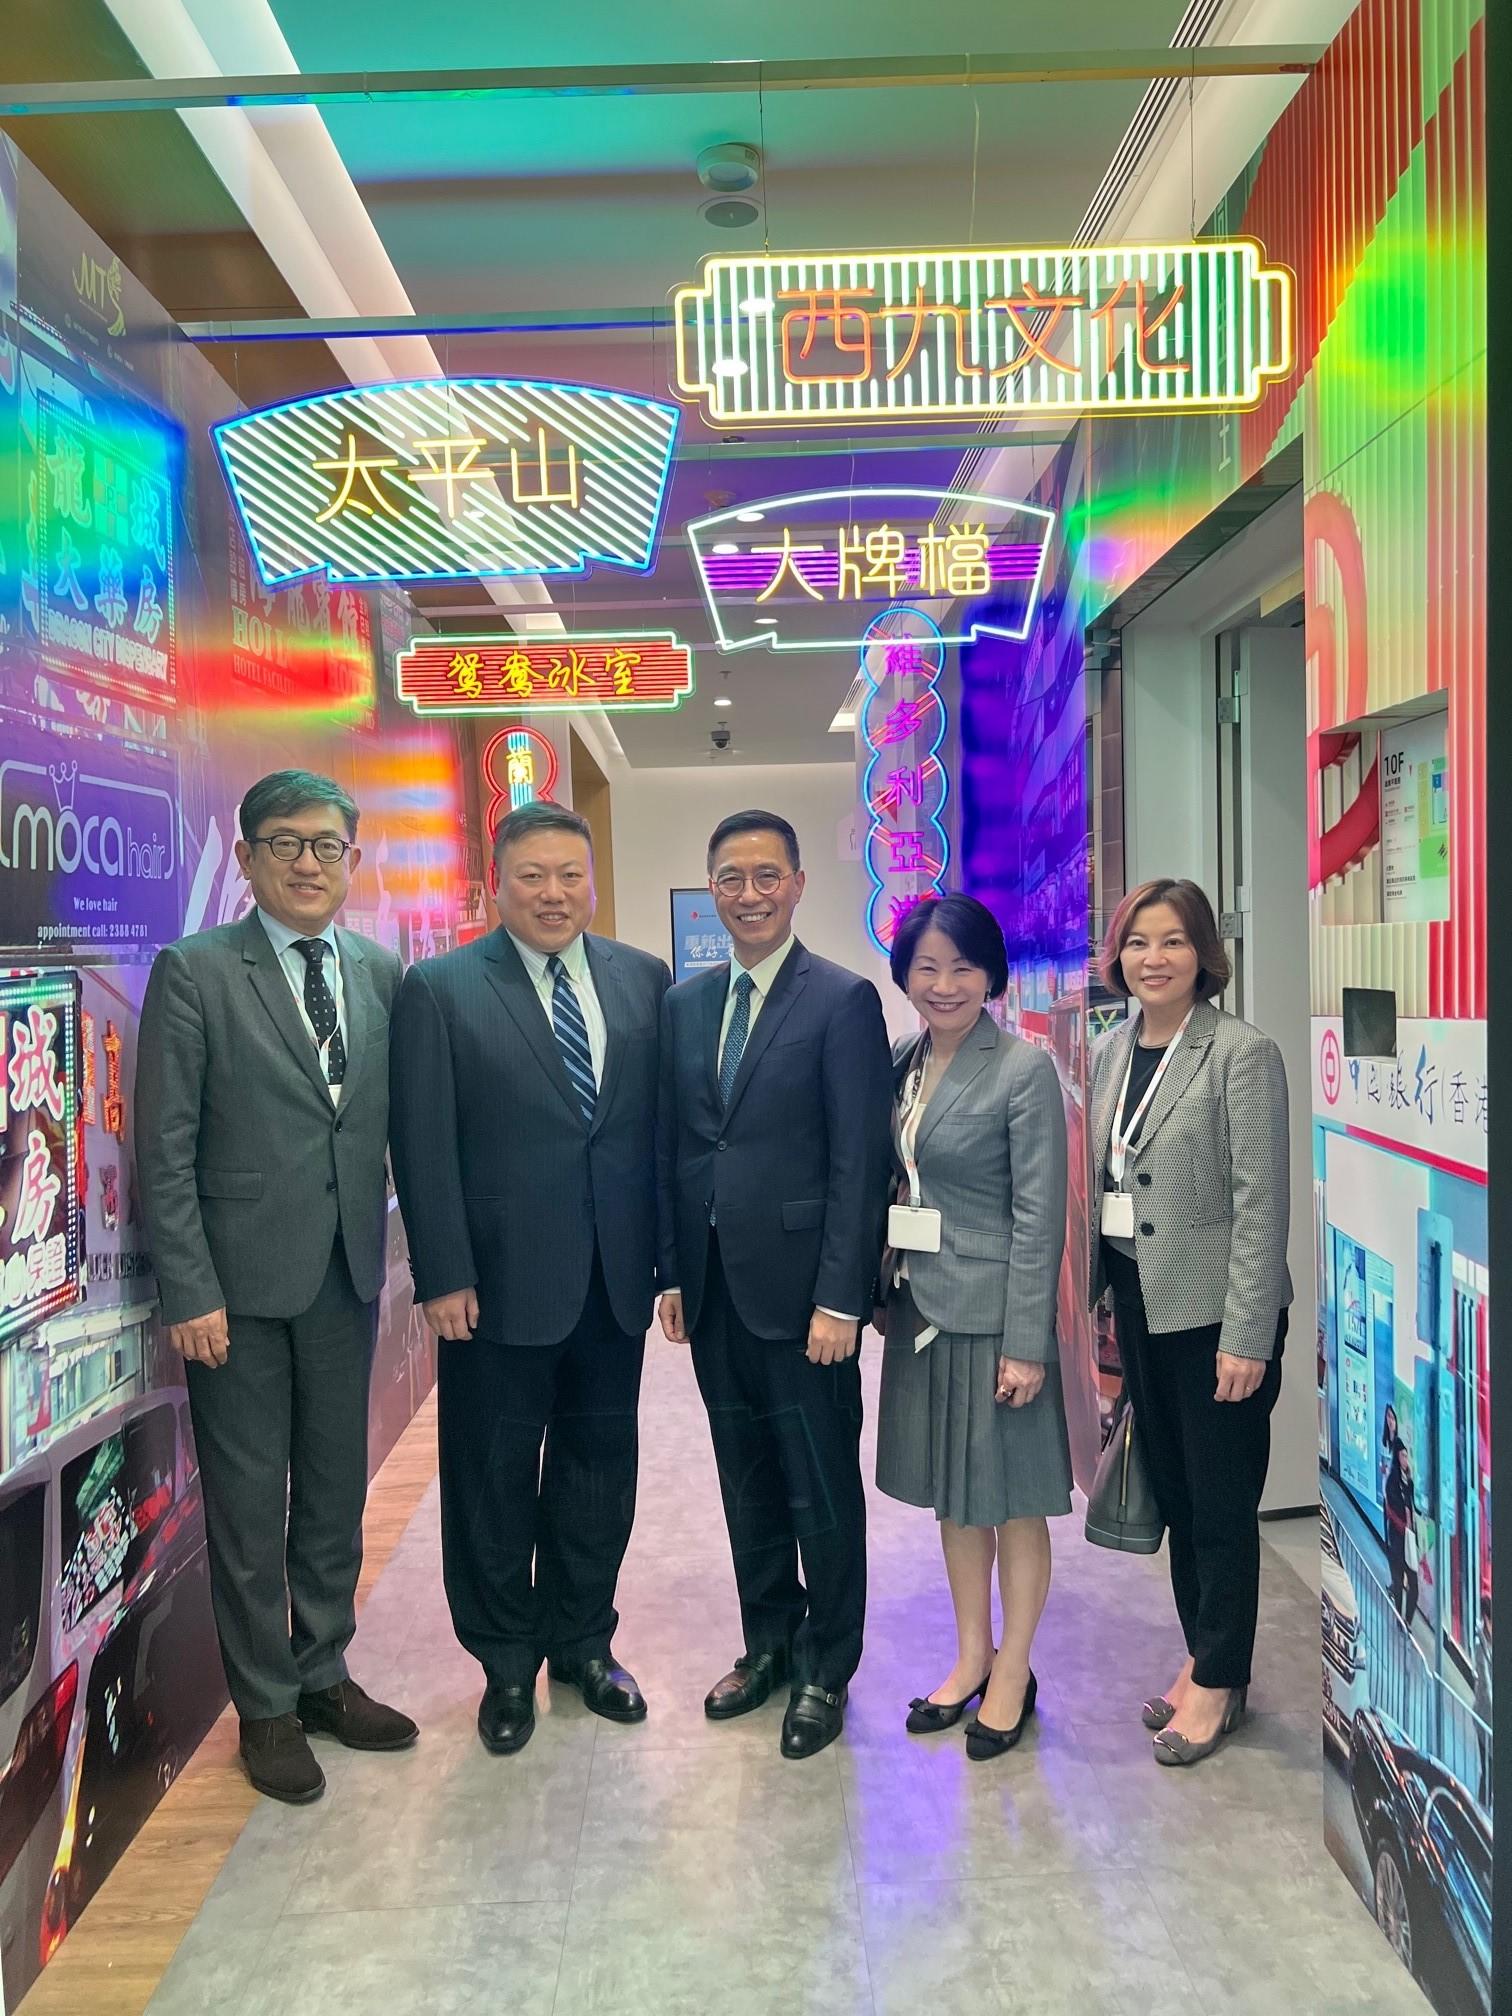 The Secretary for Culture, Sports and Tourism, Mr Kevin Yeung (centre), today (March 20) visited Guangzhou. Accompanied by the Commissioner for Tourism, Ms Vivian Sum (second right), Mr Yeung attended an activity organised by the Hong Kong Tourism Board.